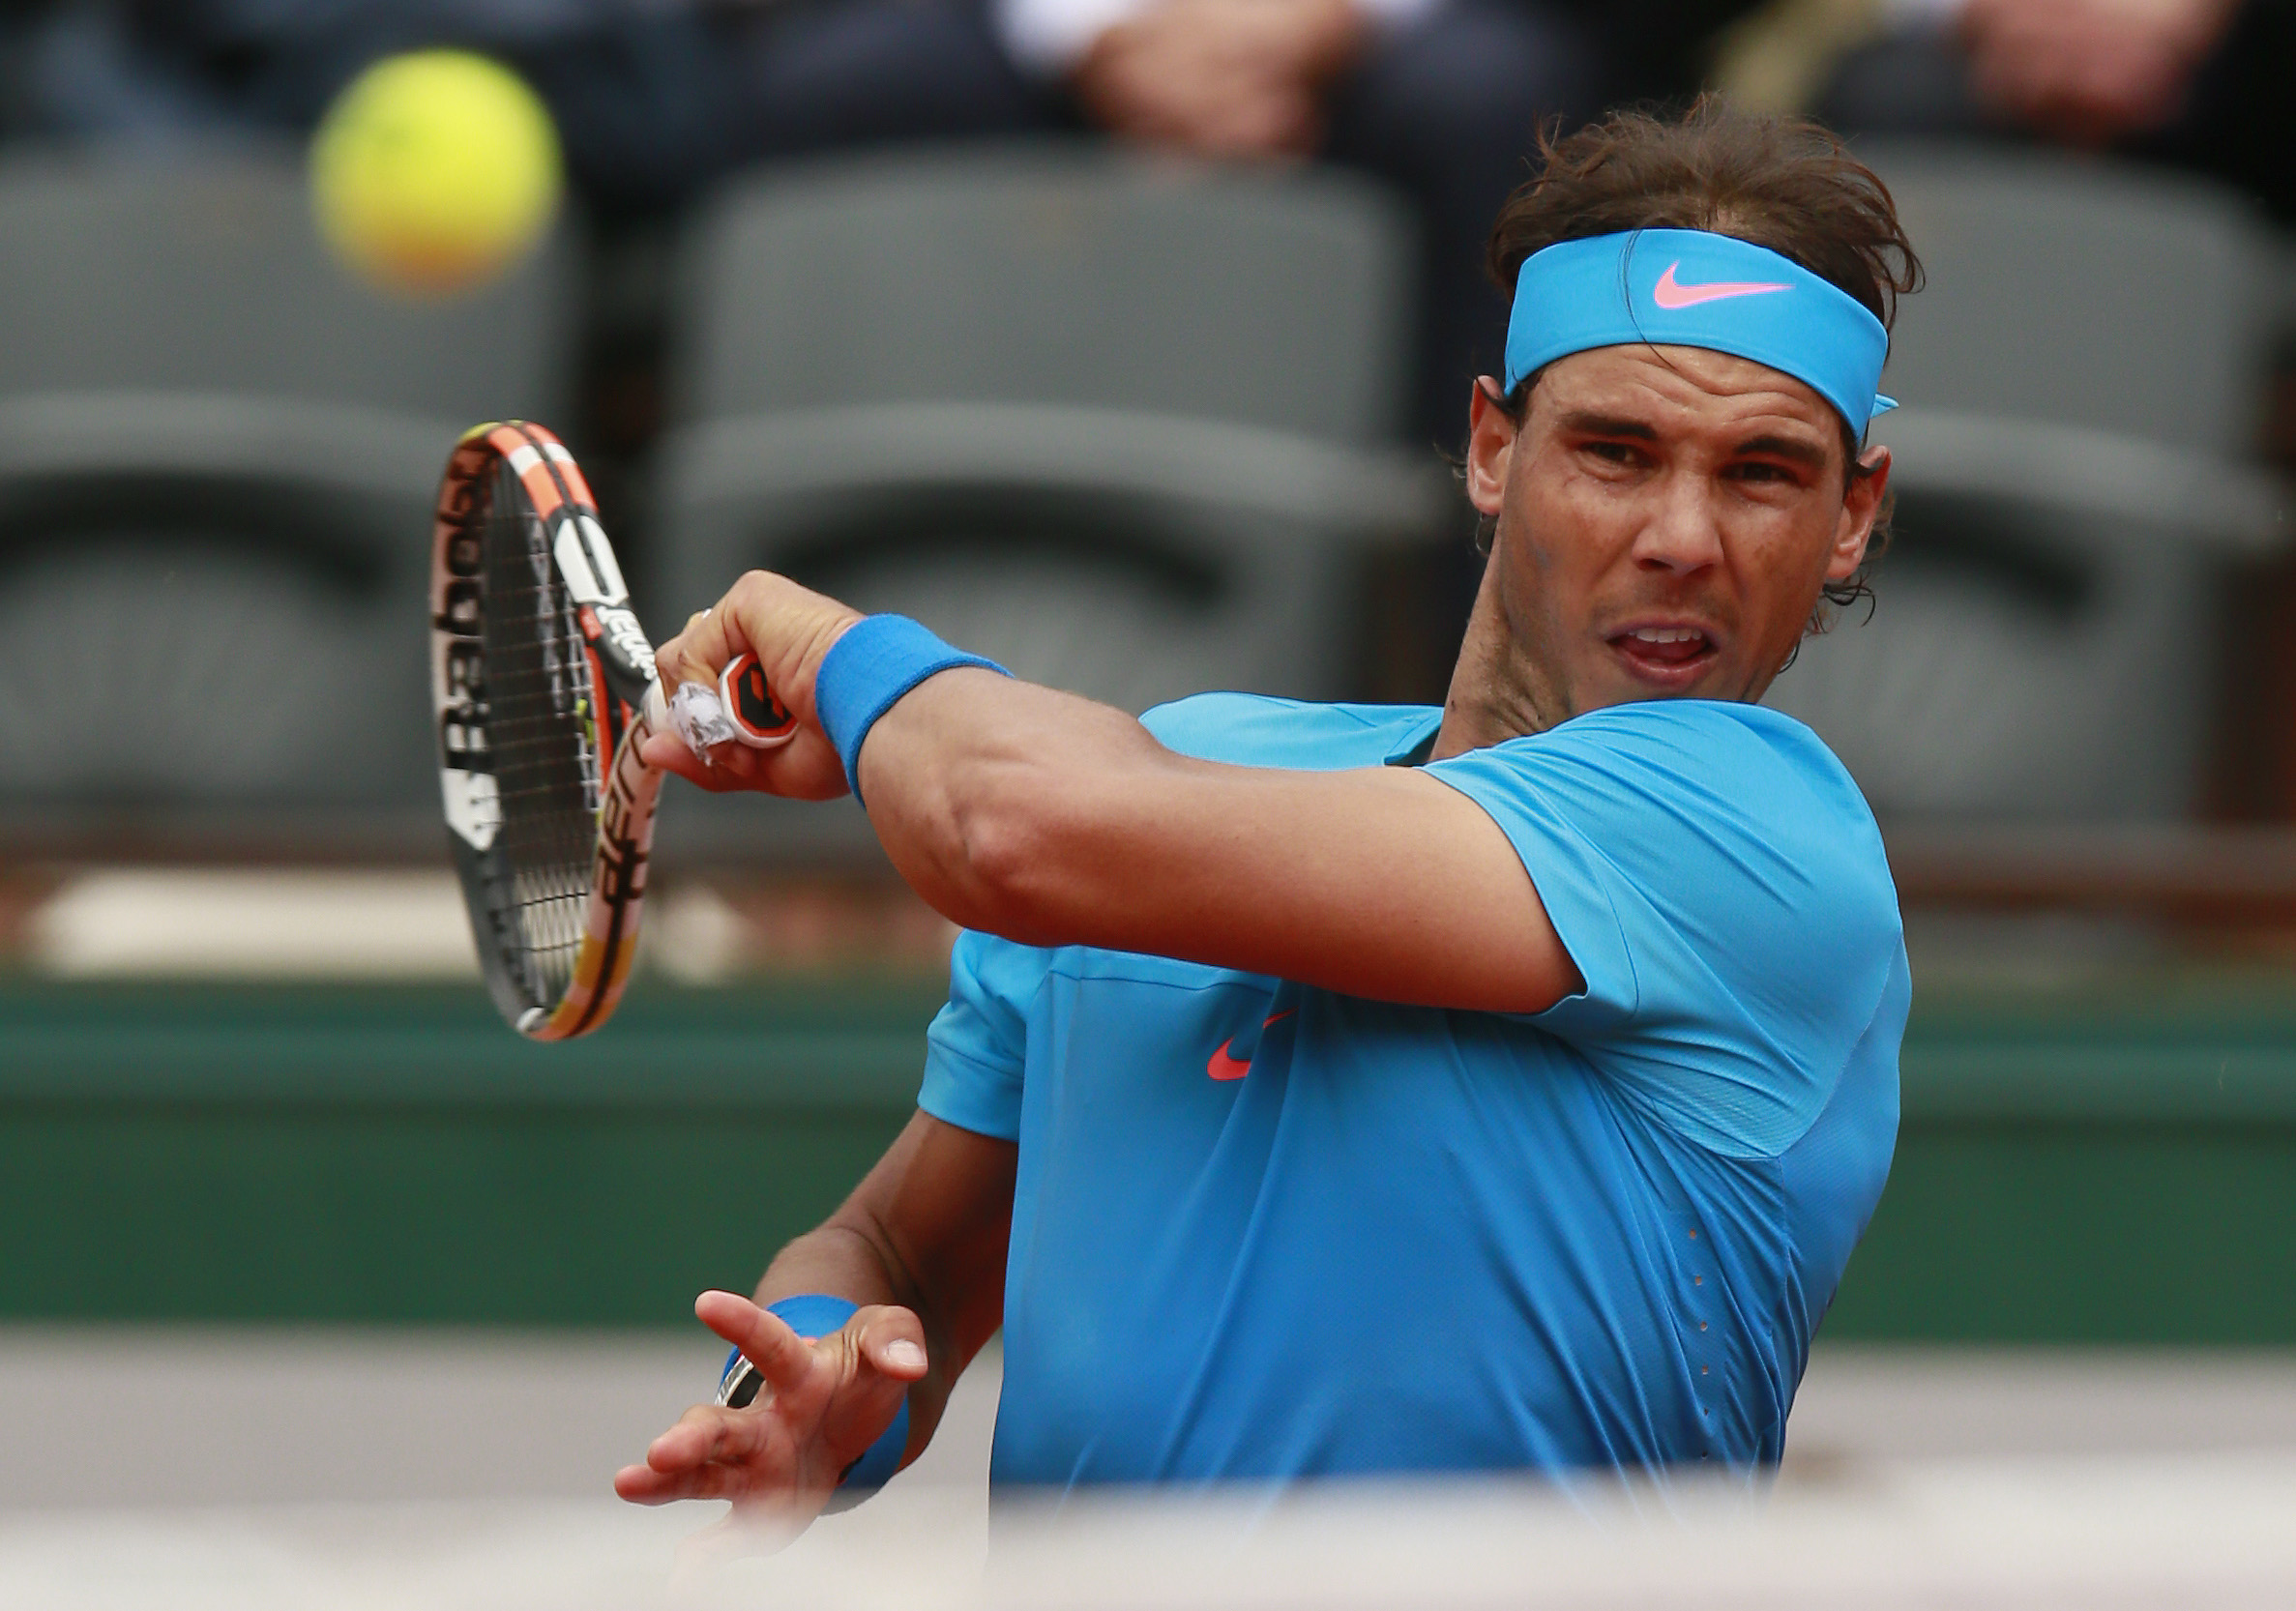 Rafael Nadal returns to young Frenchman Quentin Halys. Photo: Reuters